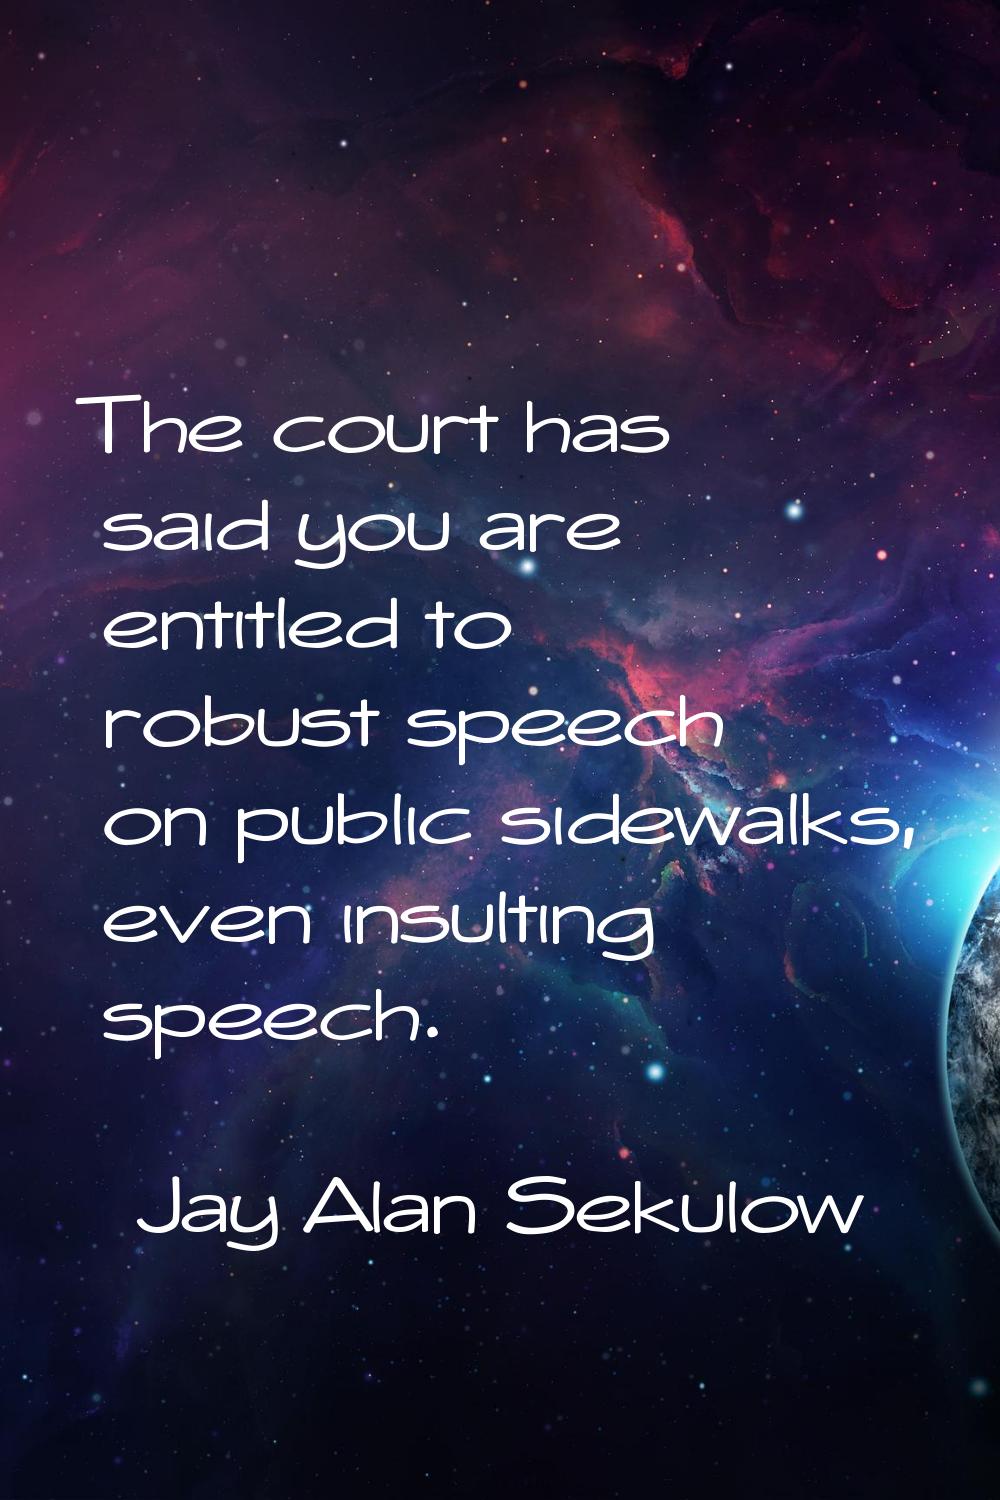 The court has said you are entitled to robust speech on public sidewalks, even insulting speech.